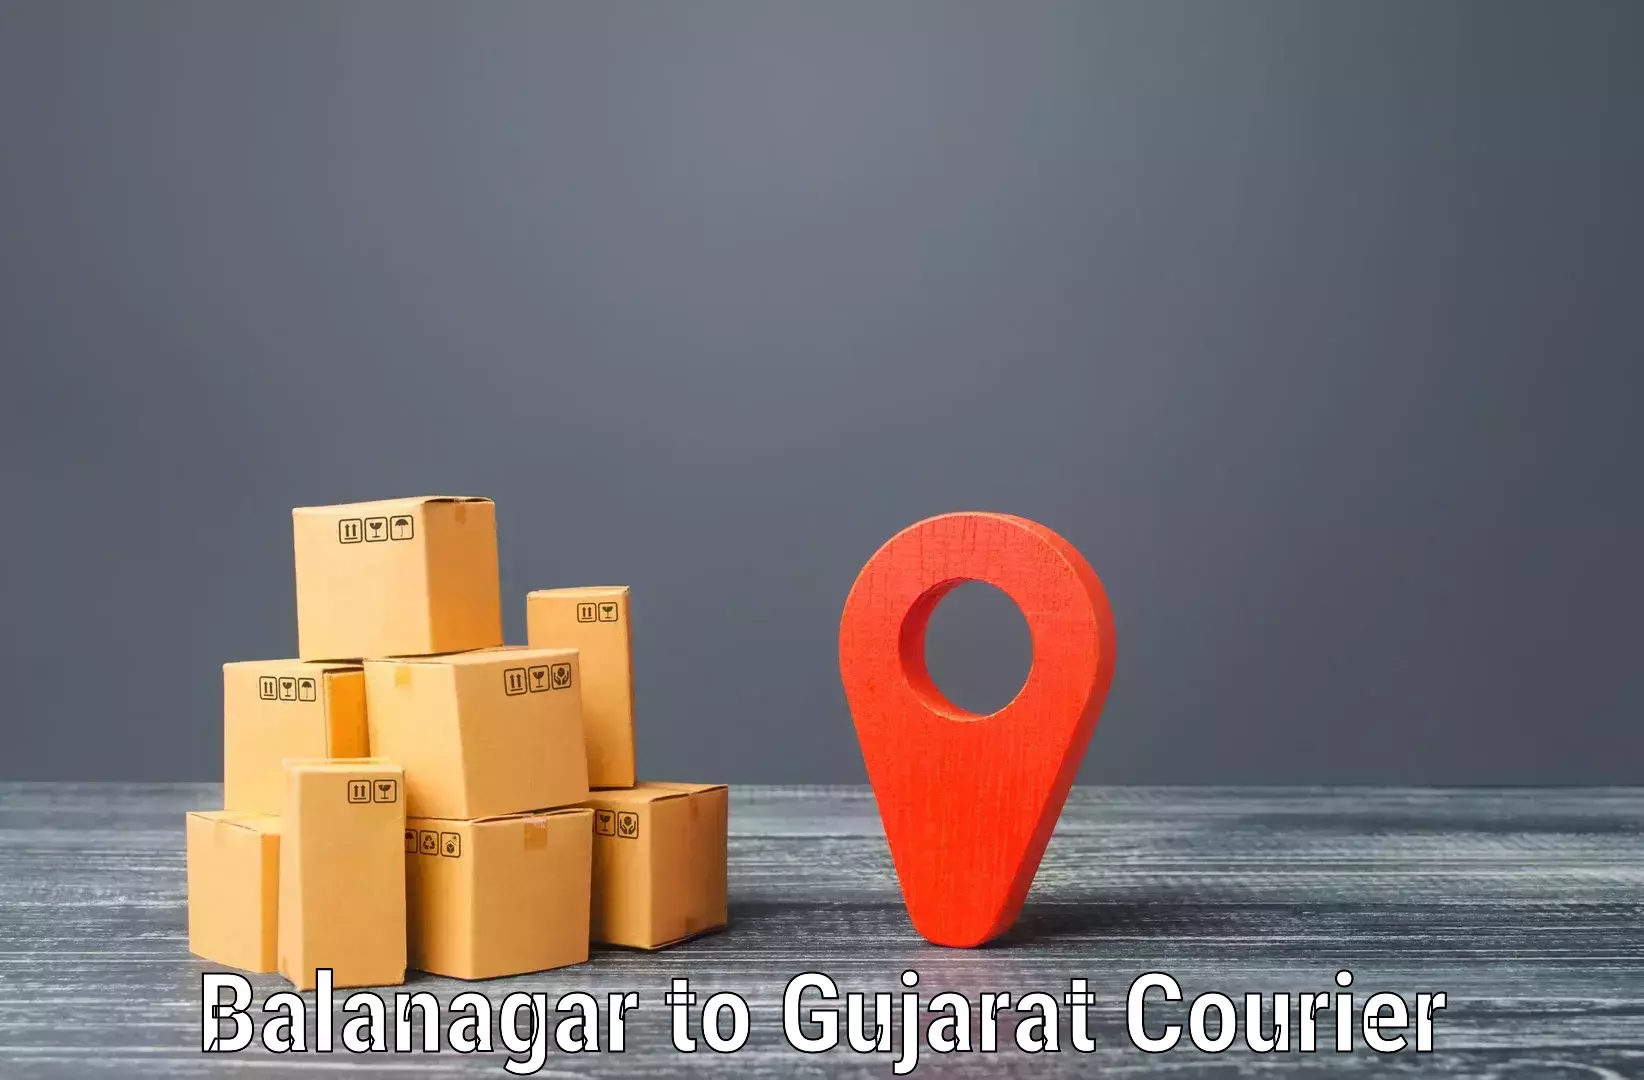 Express delivery capabilities in Balanagar to Kheda